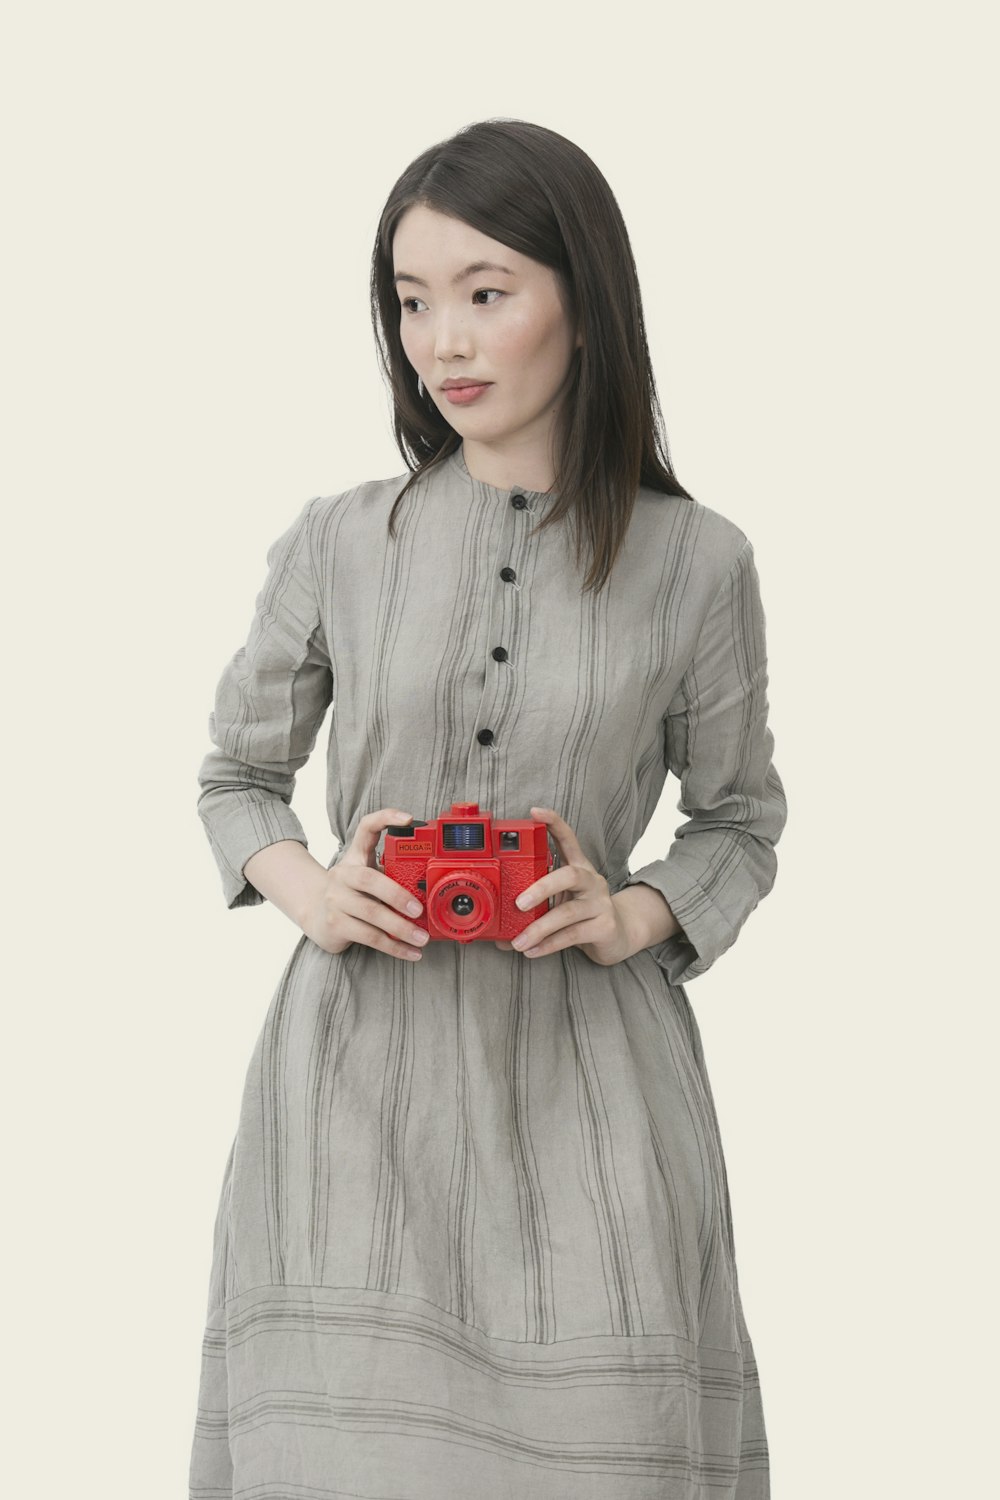 woman wearing gray striped button-up long-sleeved dress holding red point-and-shoot camera